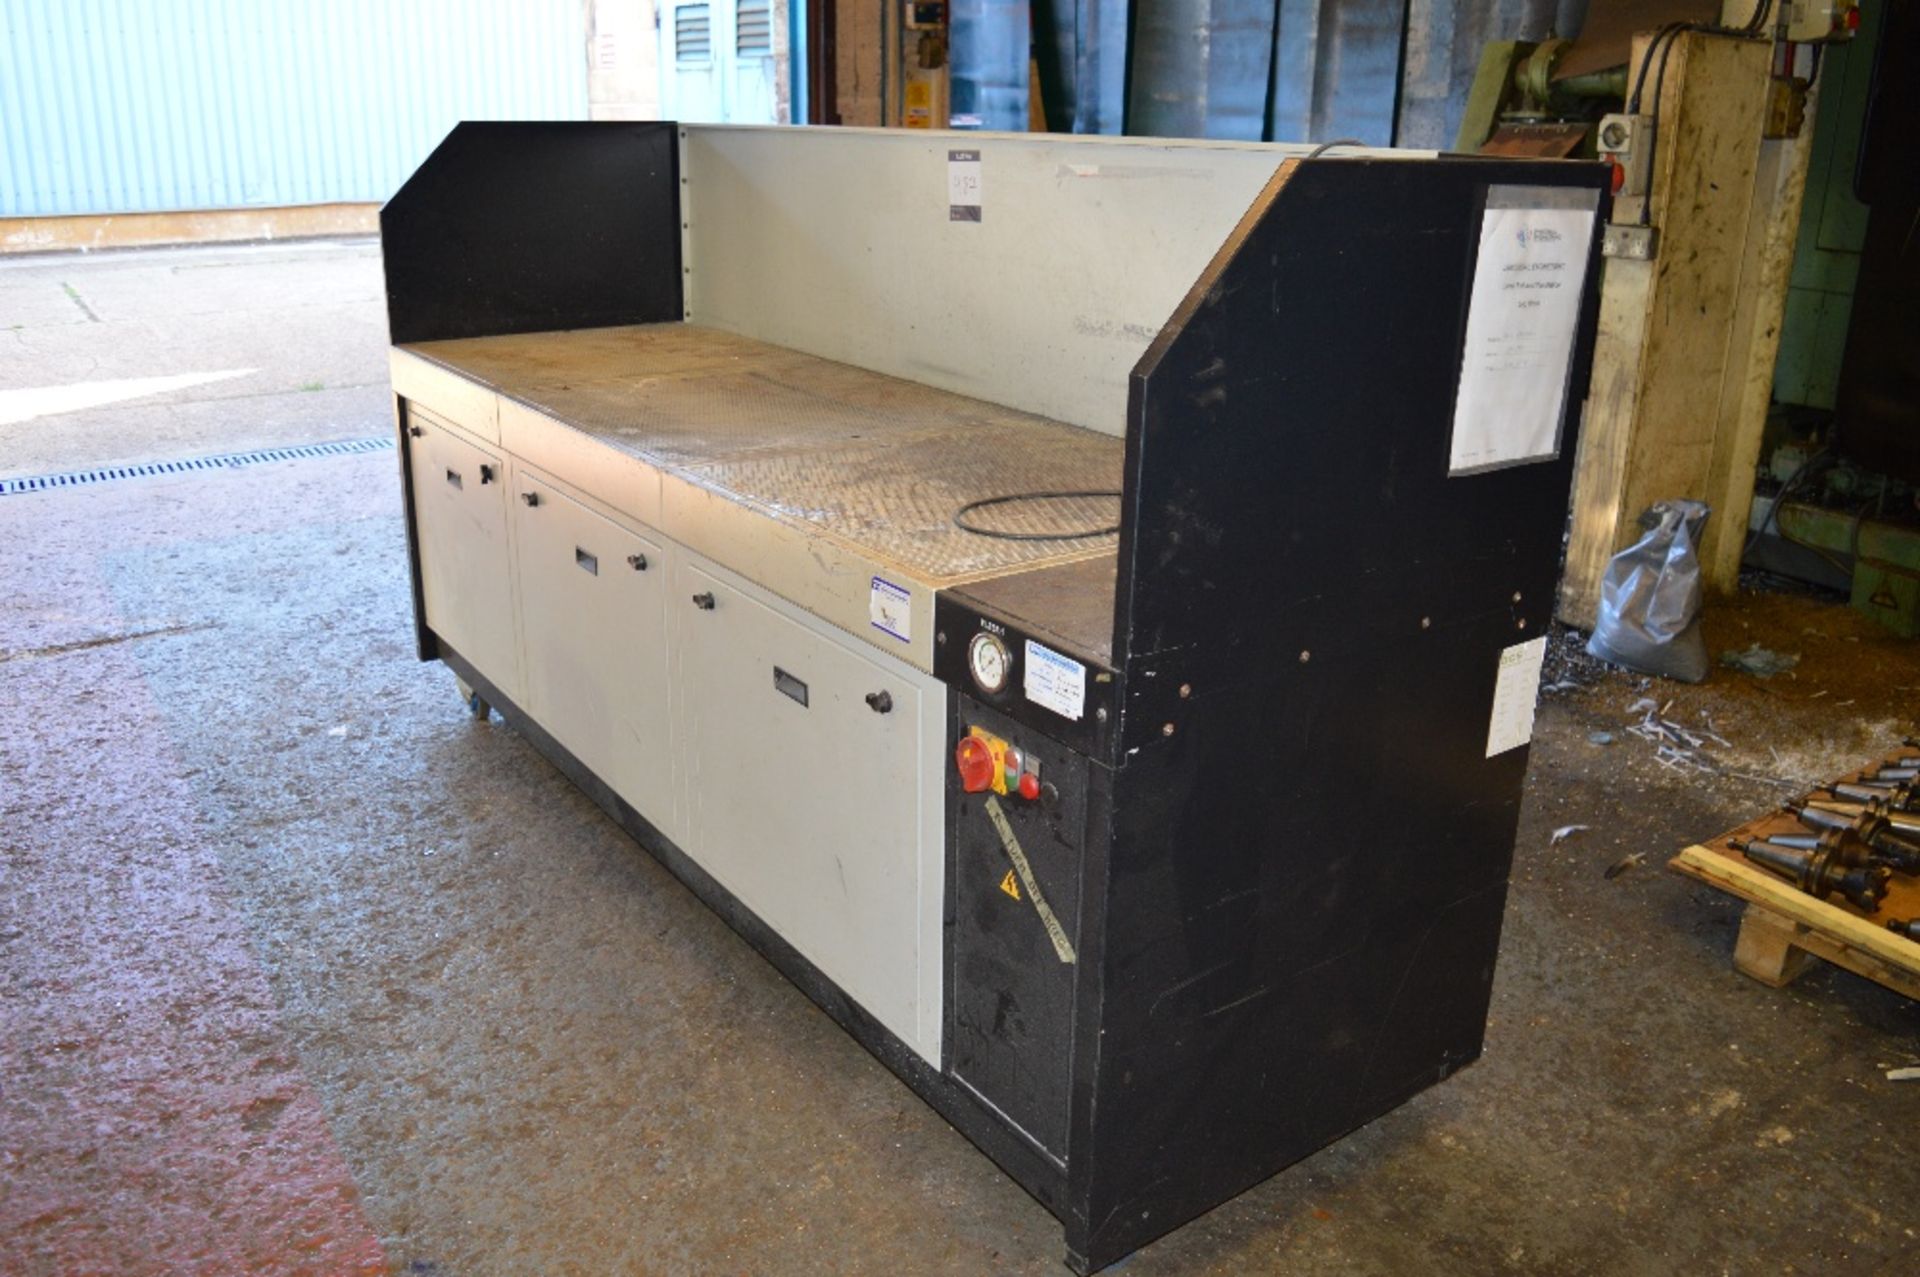 Air Cleaning Systems Ltd, Model: FB2000 II, Workst - Image 3 of 3